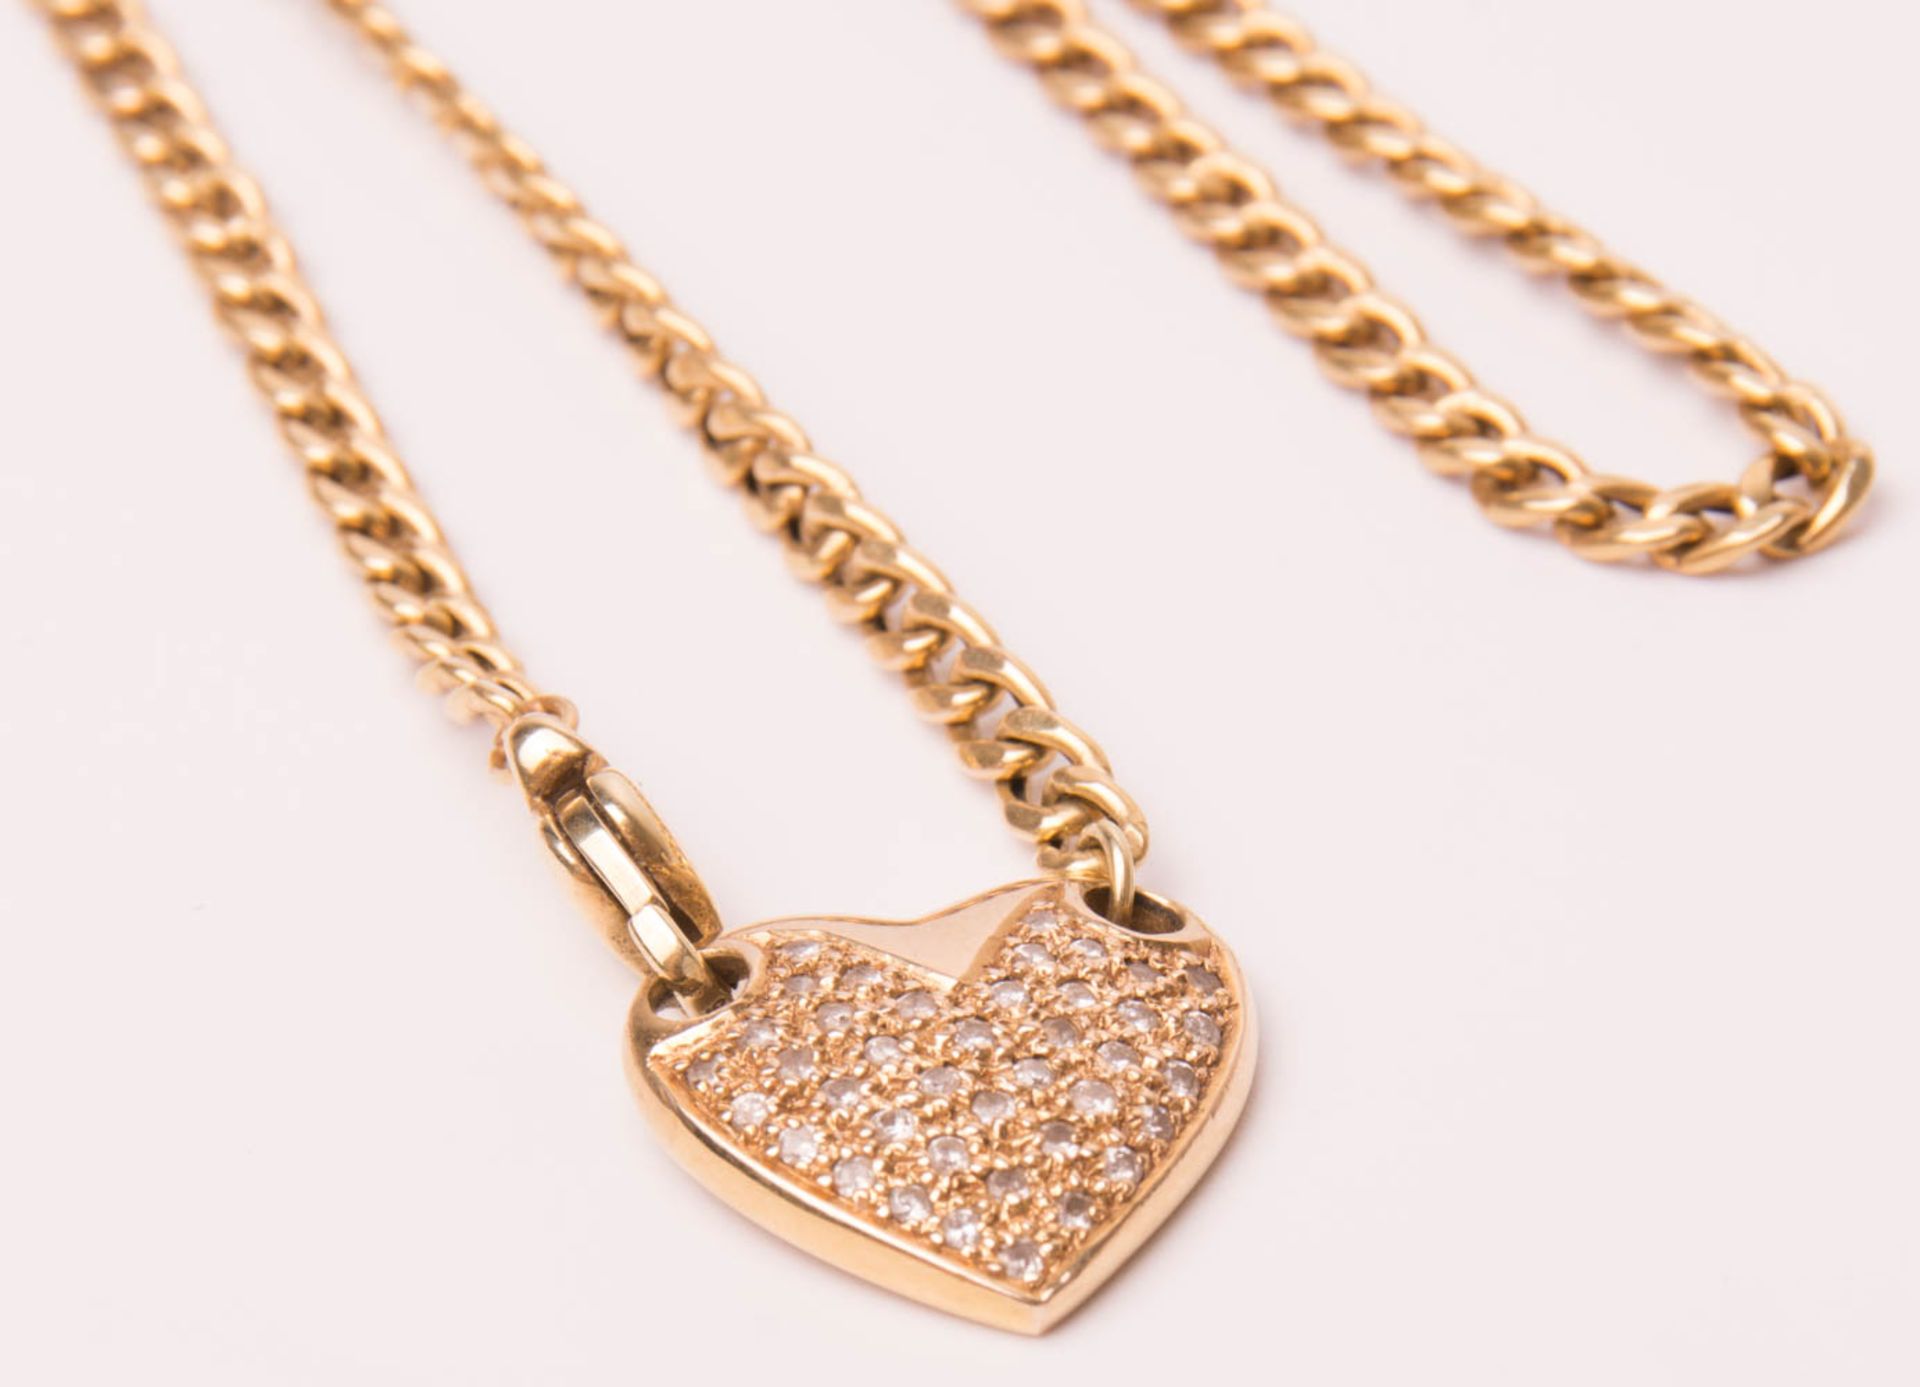 Necklace with heart pendant, 585 yellow gold. - Image 2 of 3